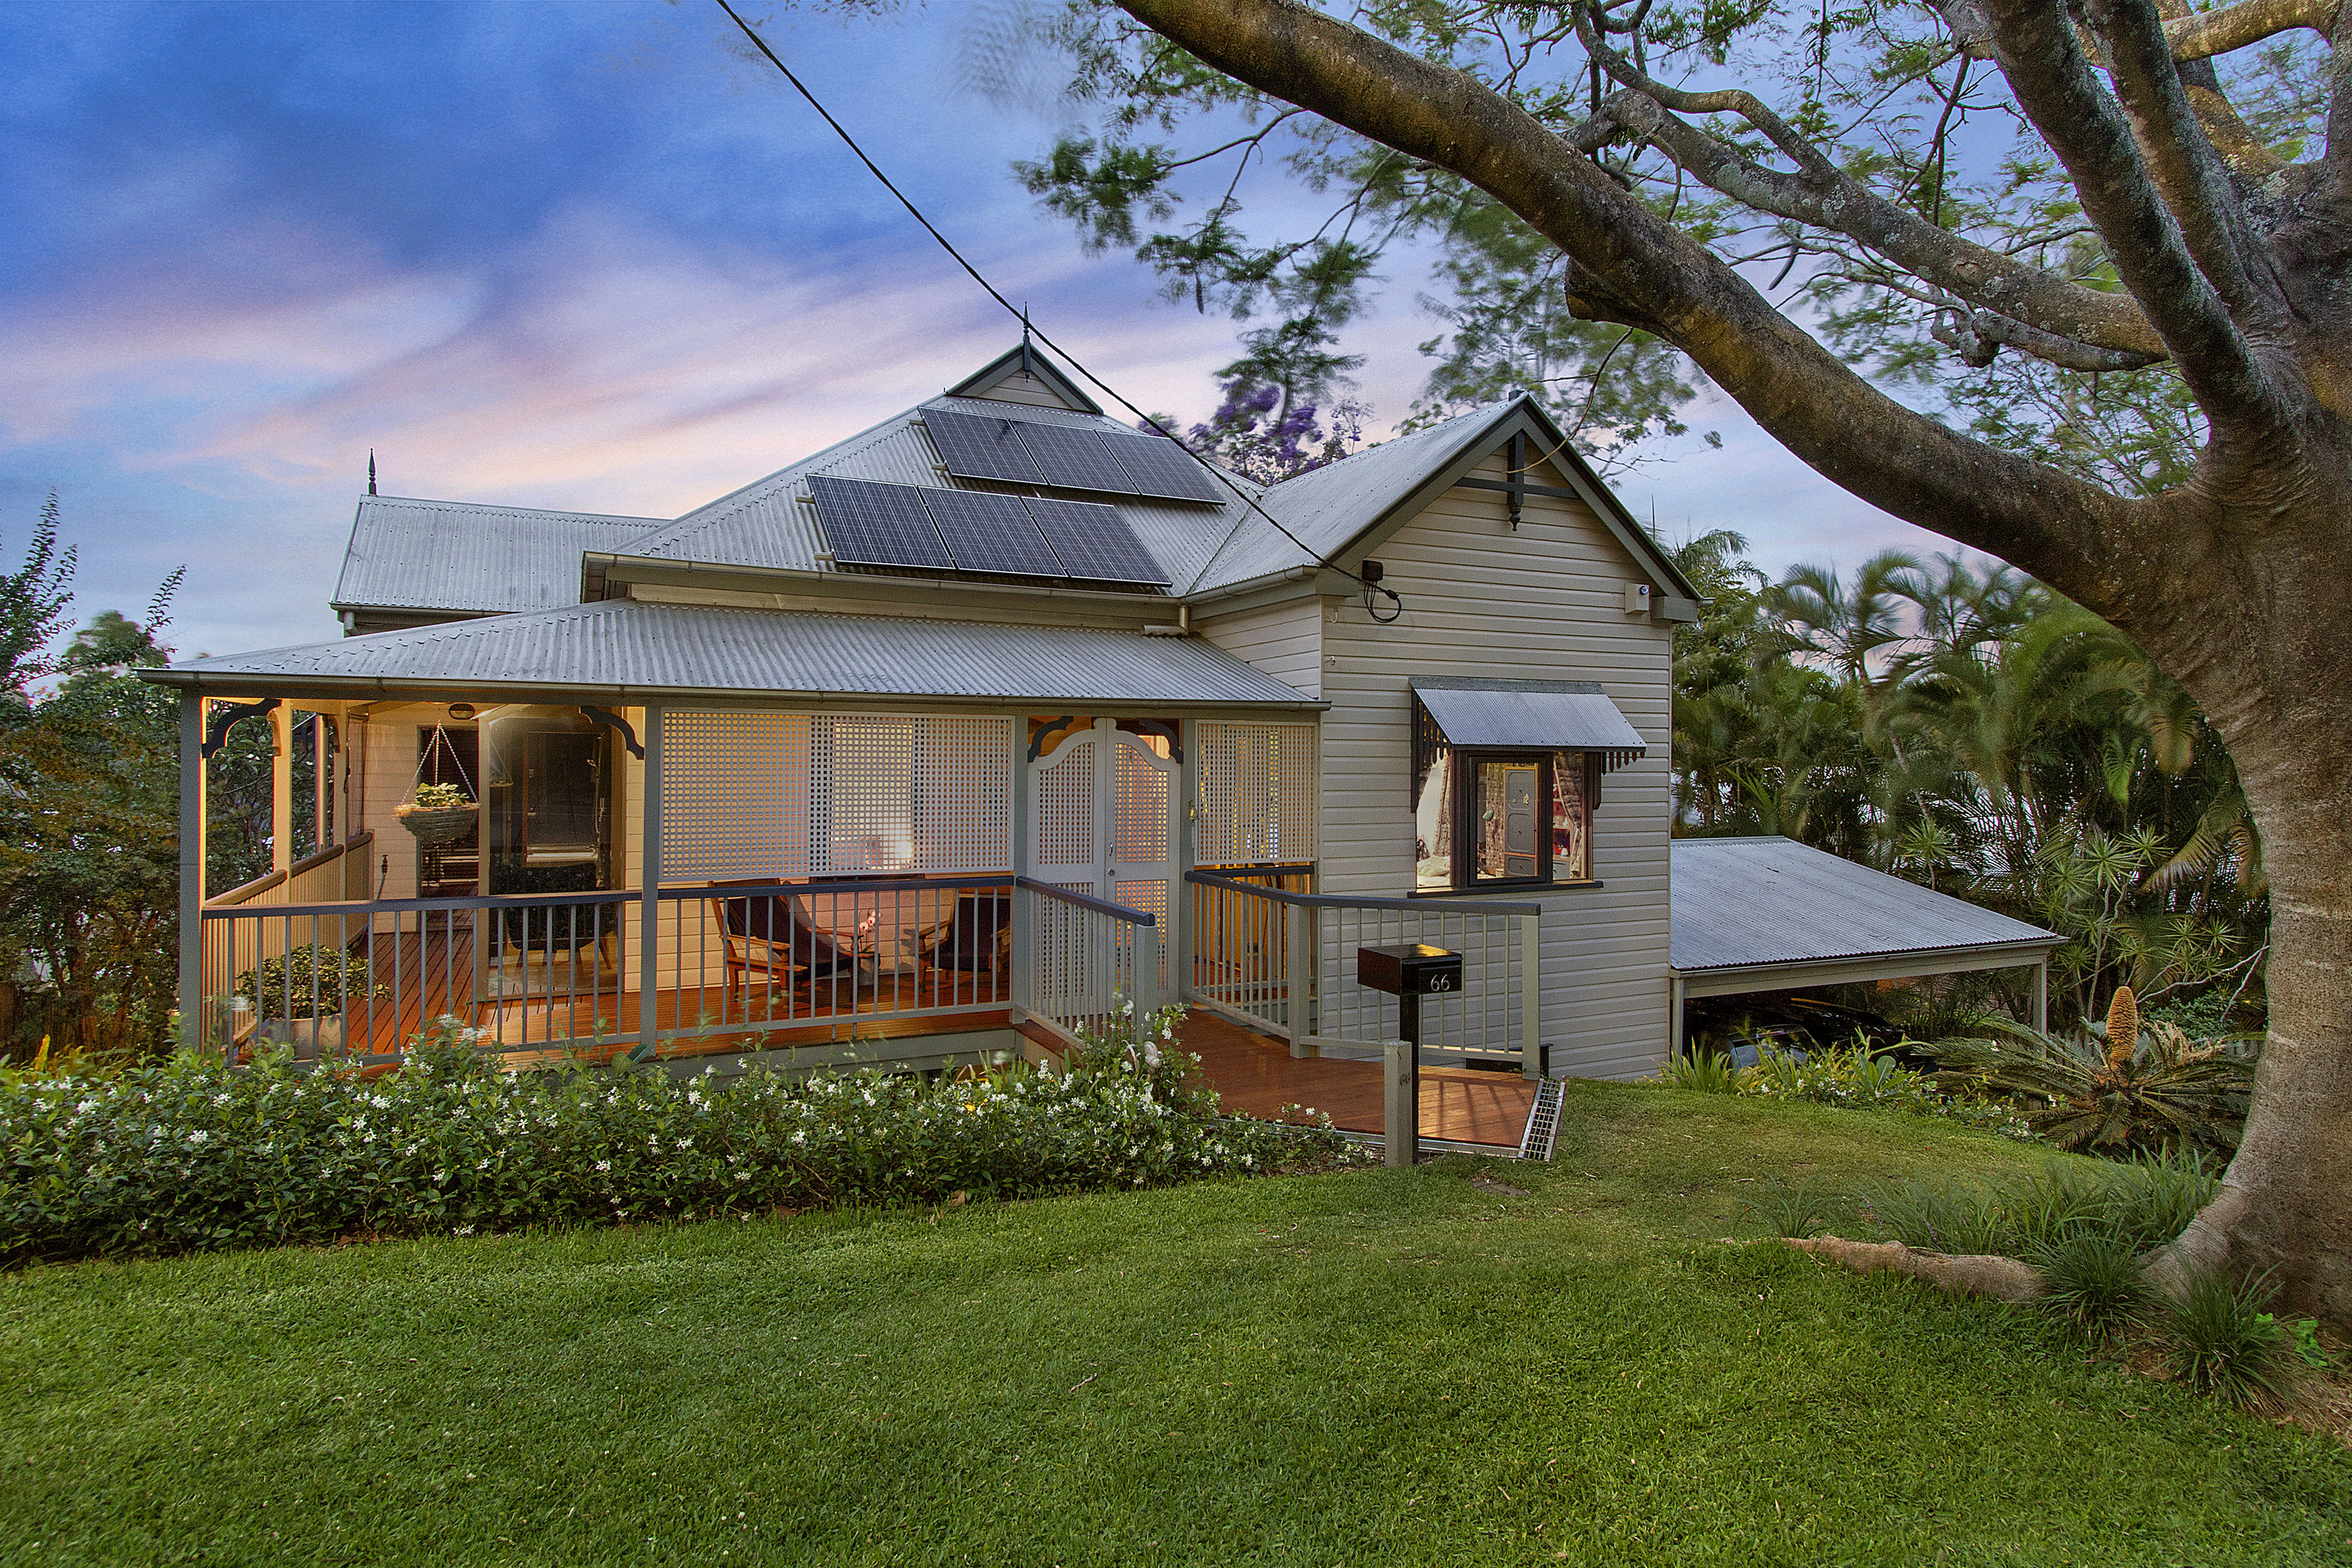 Presenting your home to achieve the best price in Brisbane’s inner-west